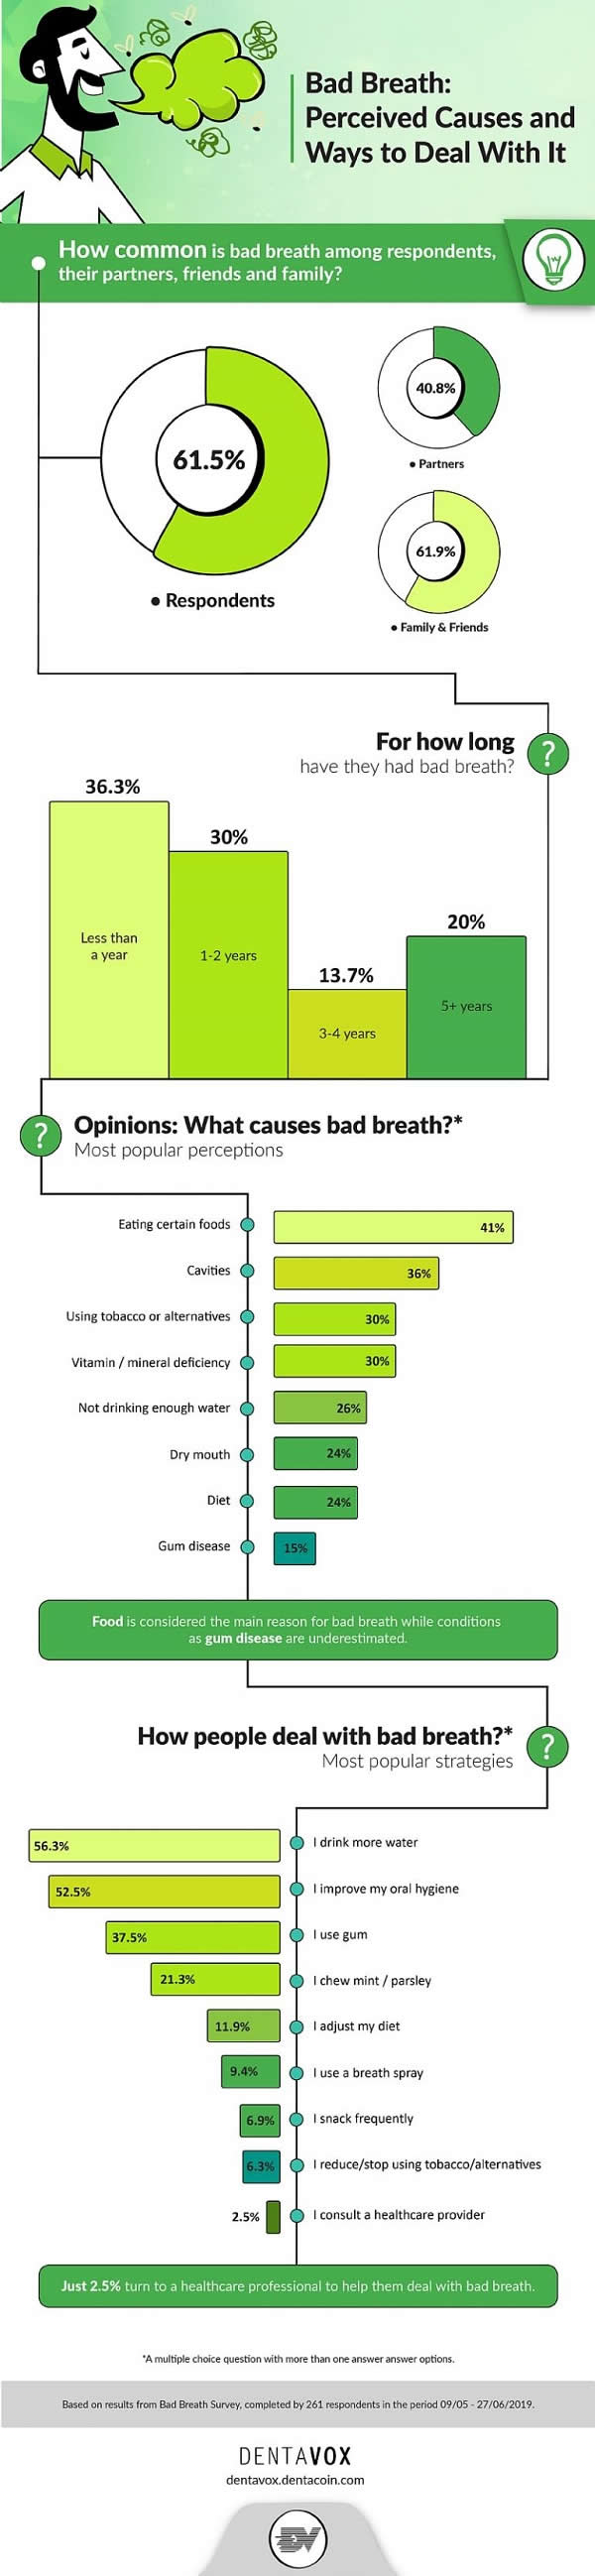 Bad Breath Peceived Causes and Ways to Deal with It